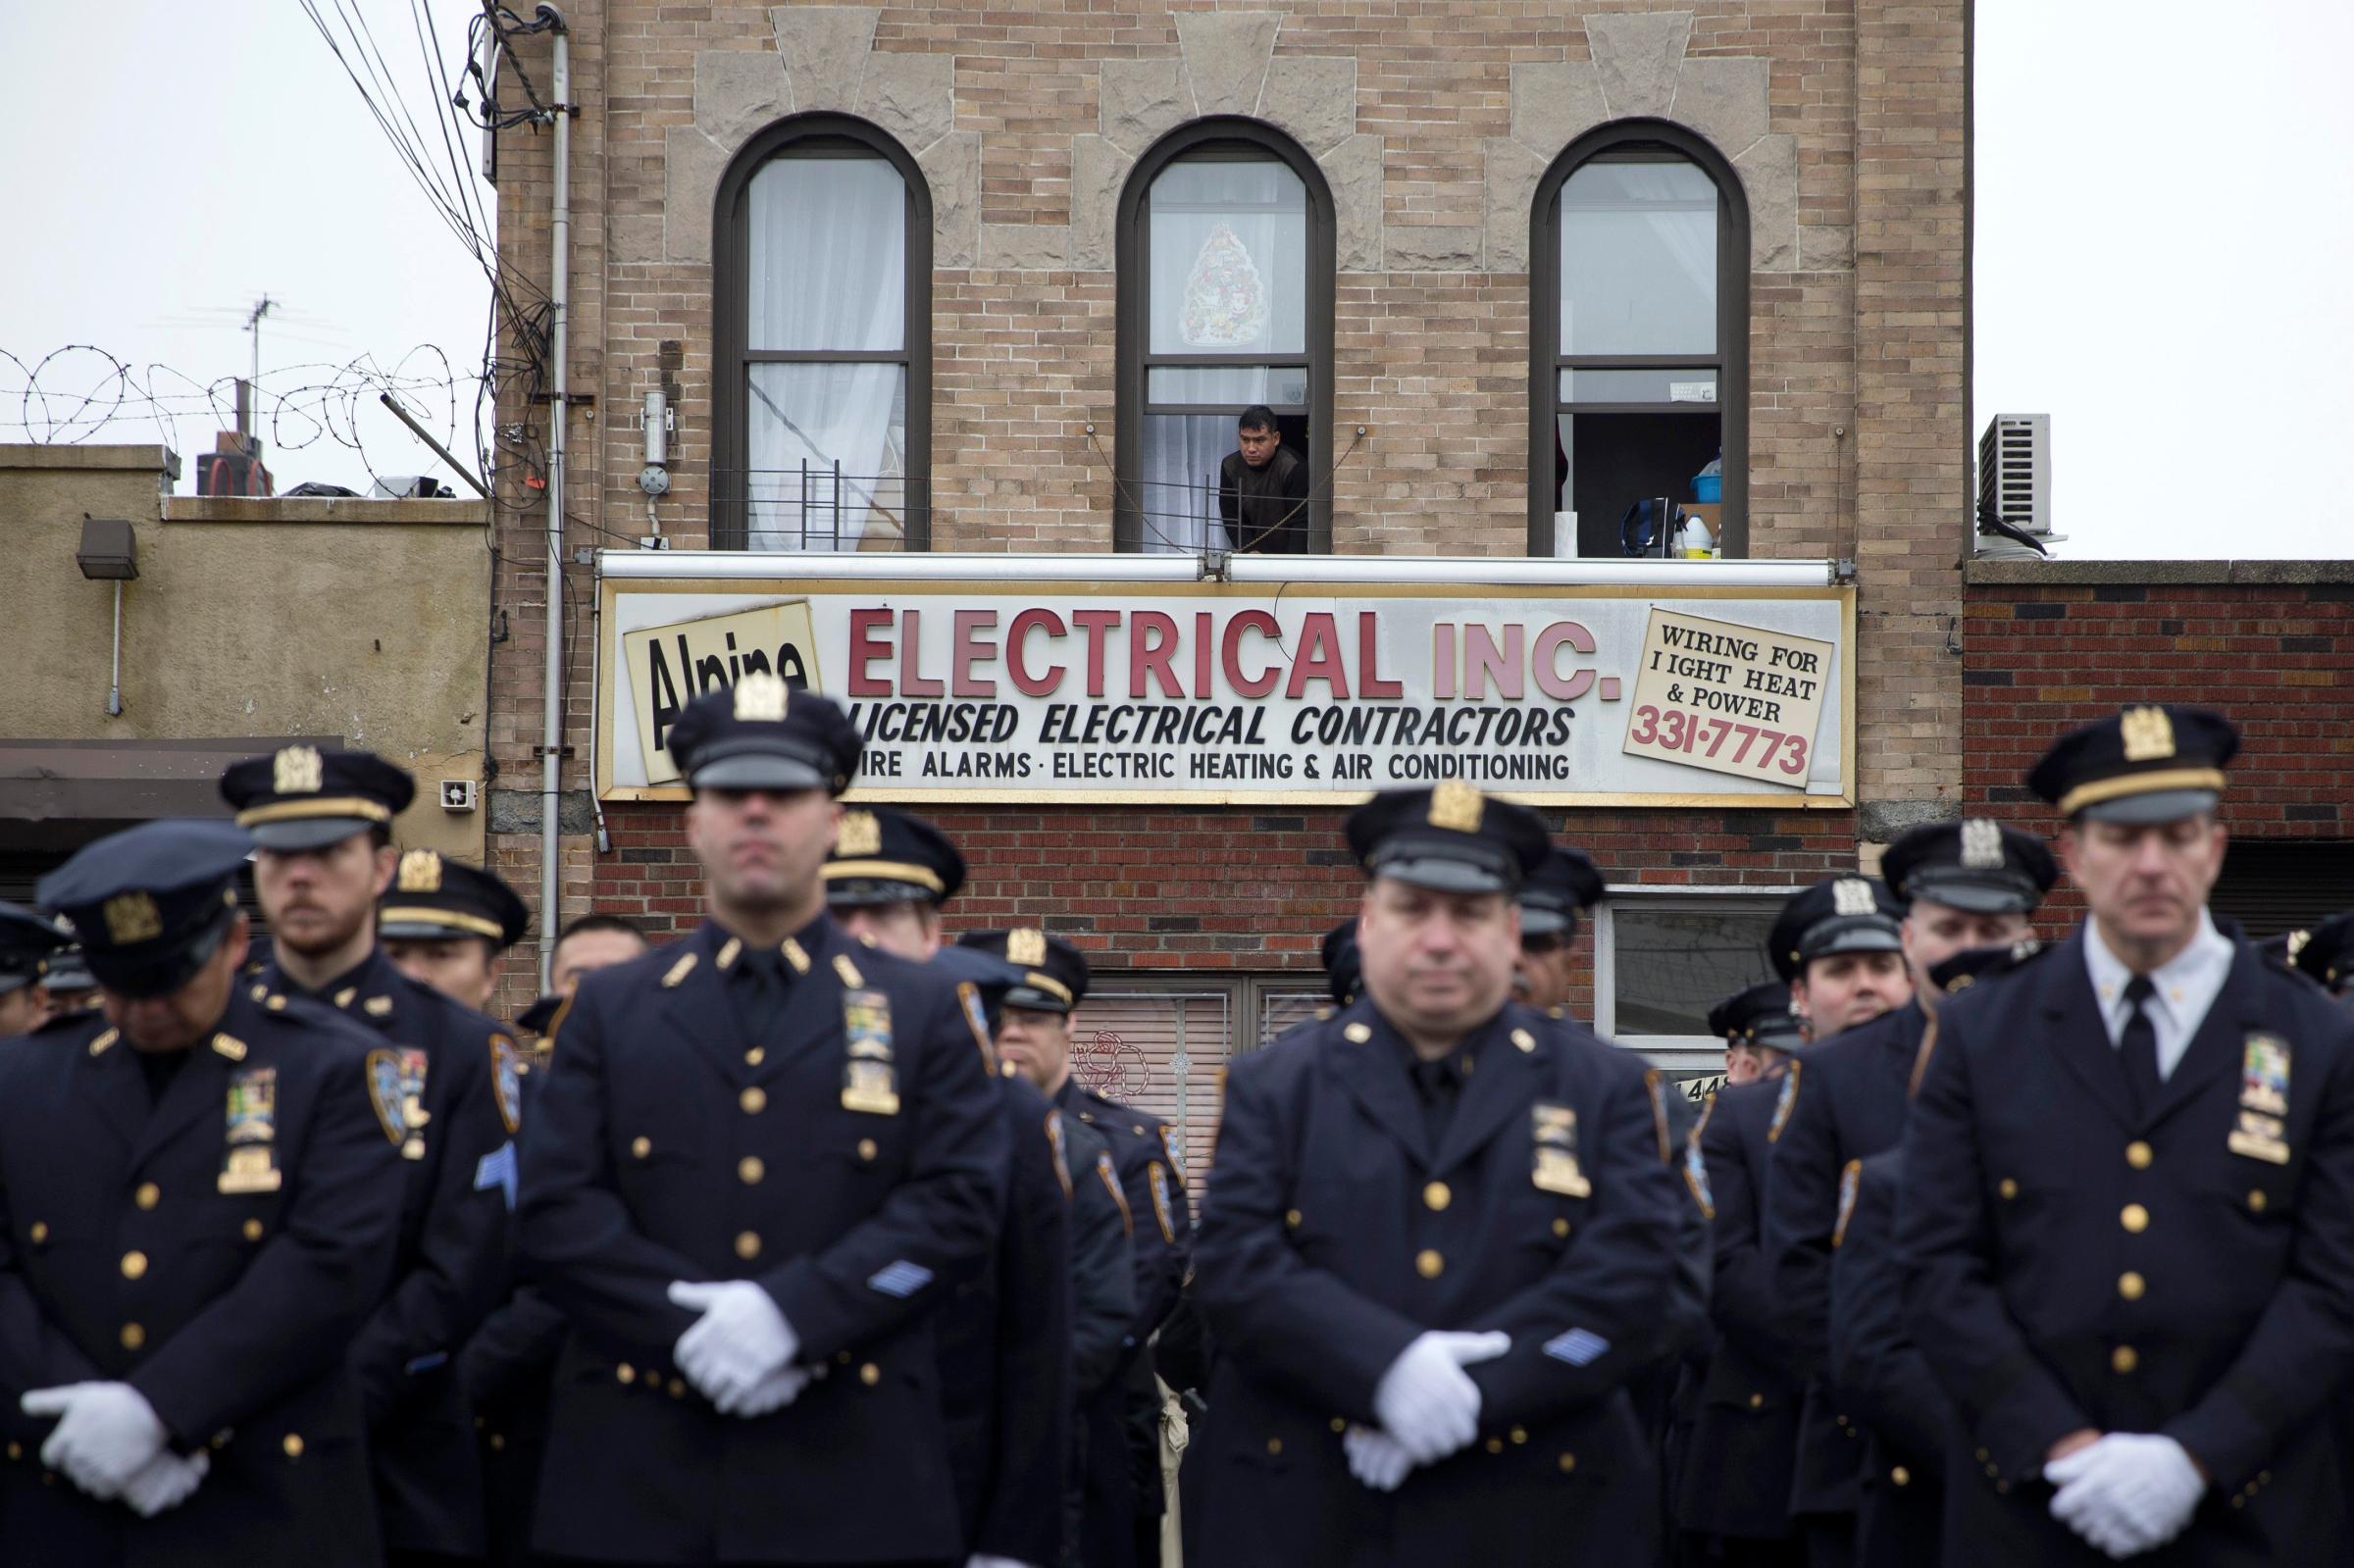 A spectator looks out onto officers during the funeral of New York Police Department Officer Wenjian Liu at Aievoli Funeral Home on Jan. 4, 2015 in the Brooklyn borough of New York.